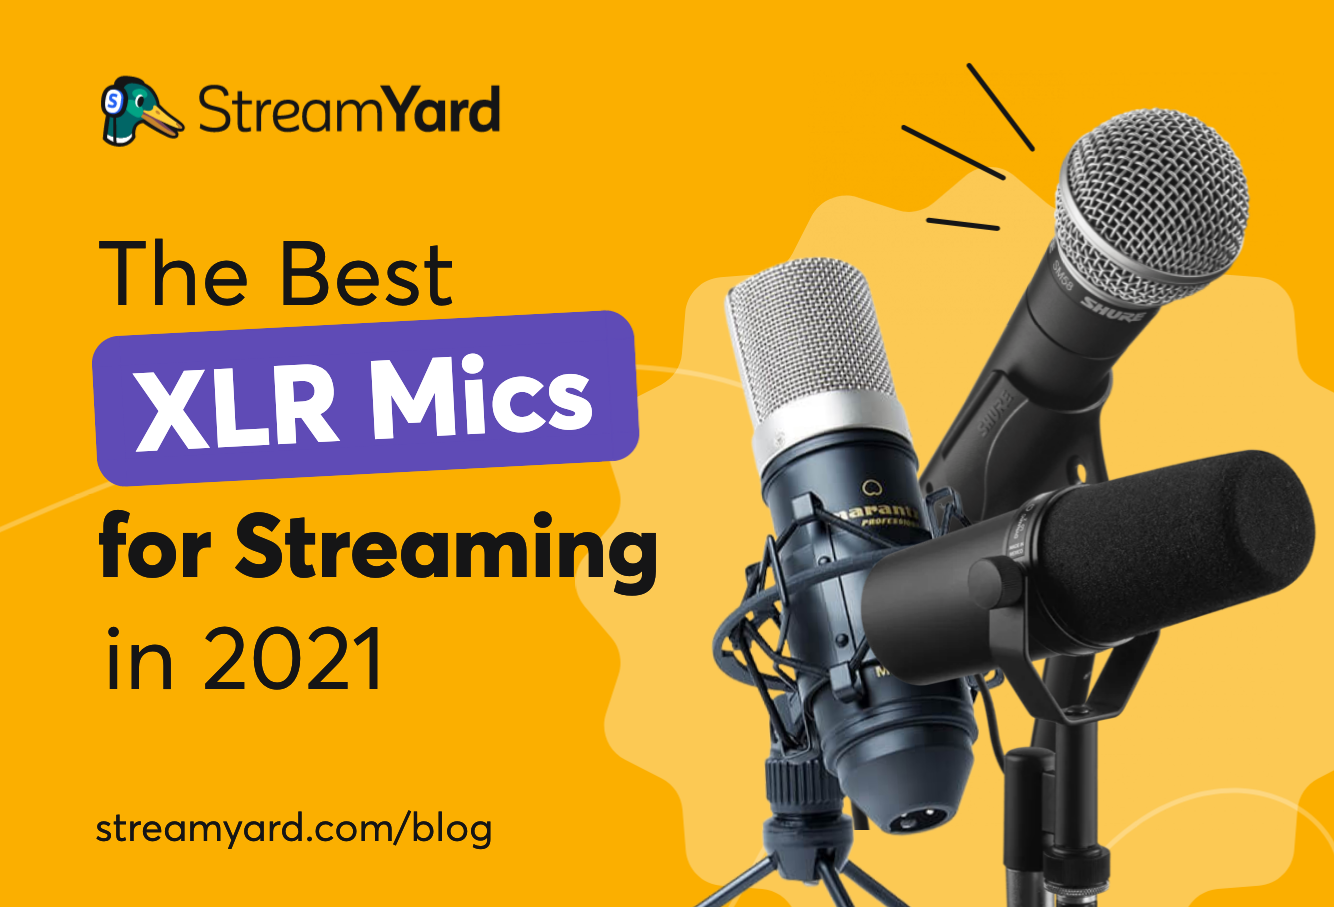 Top 5 Gaming and Streaming Microphones of 2021! 